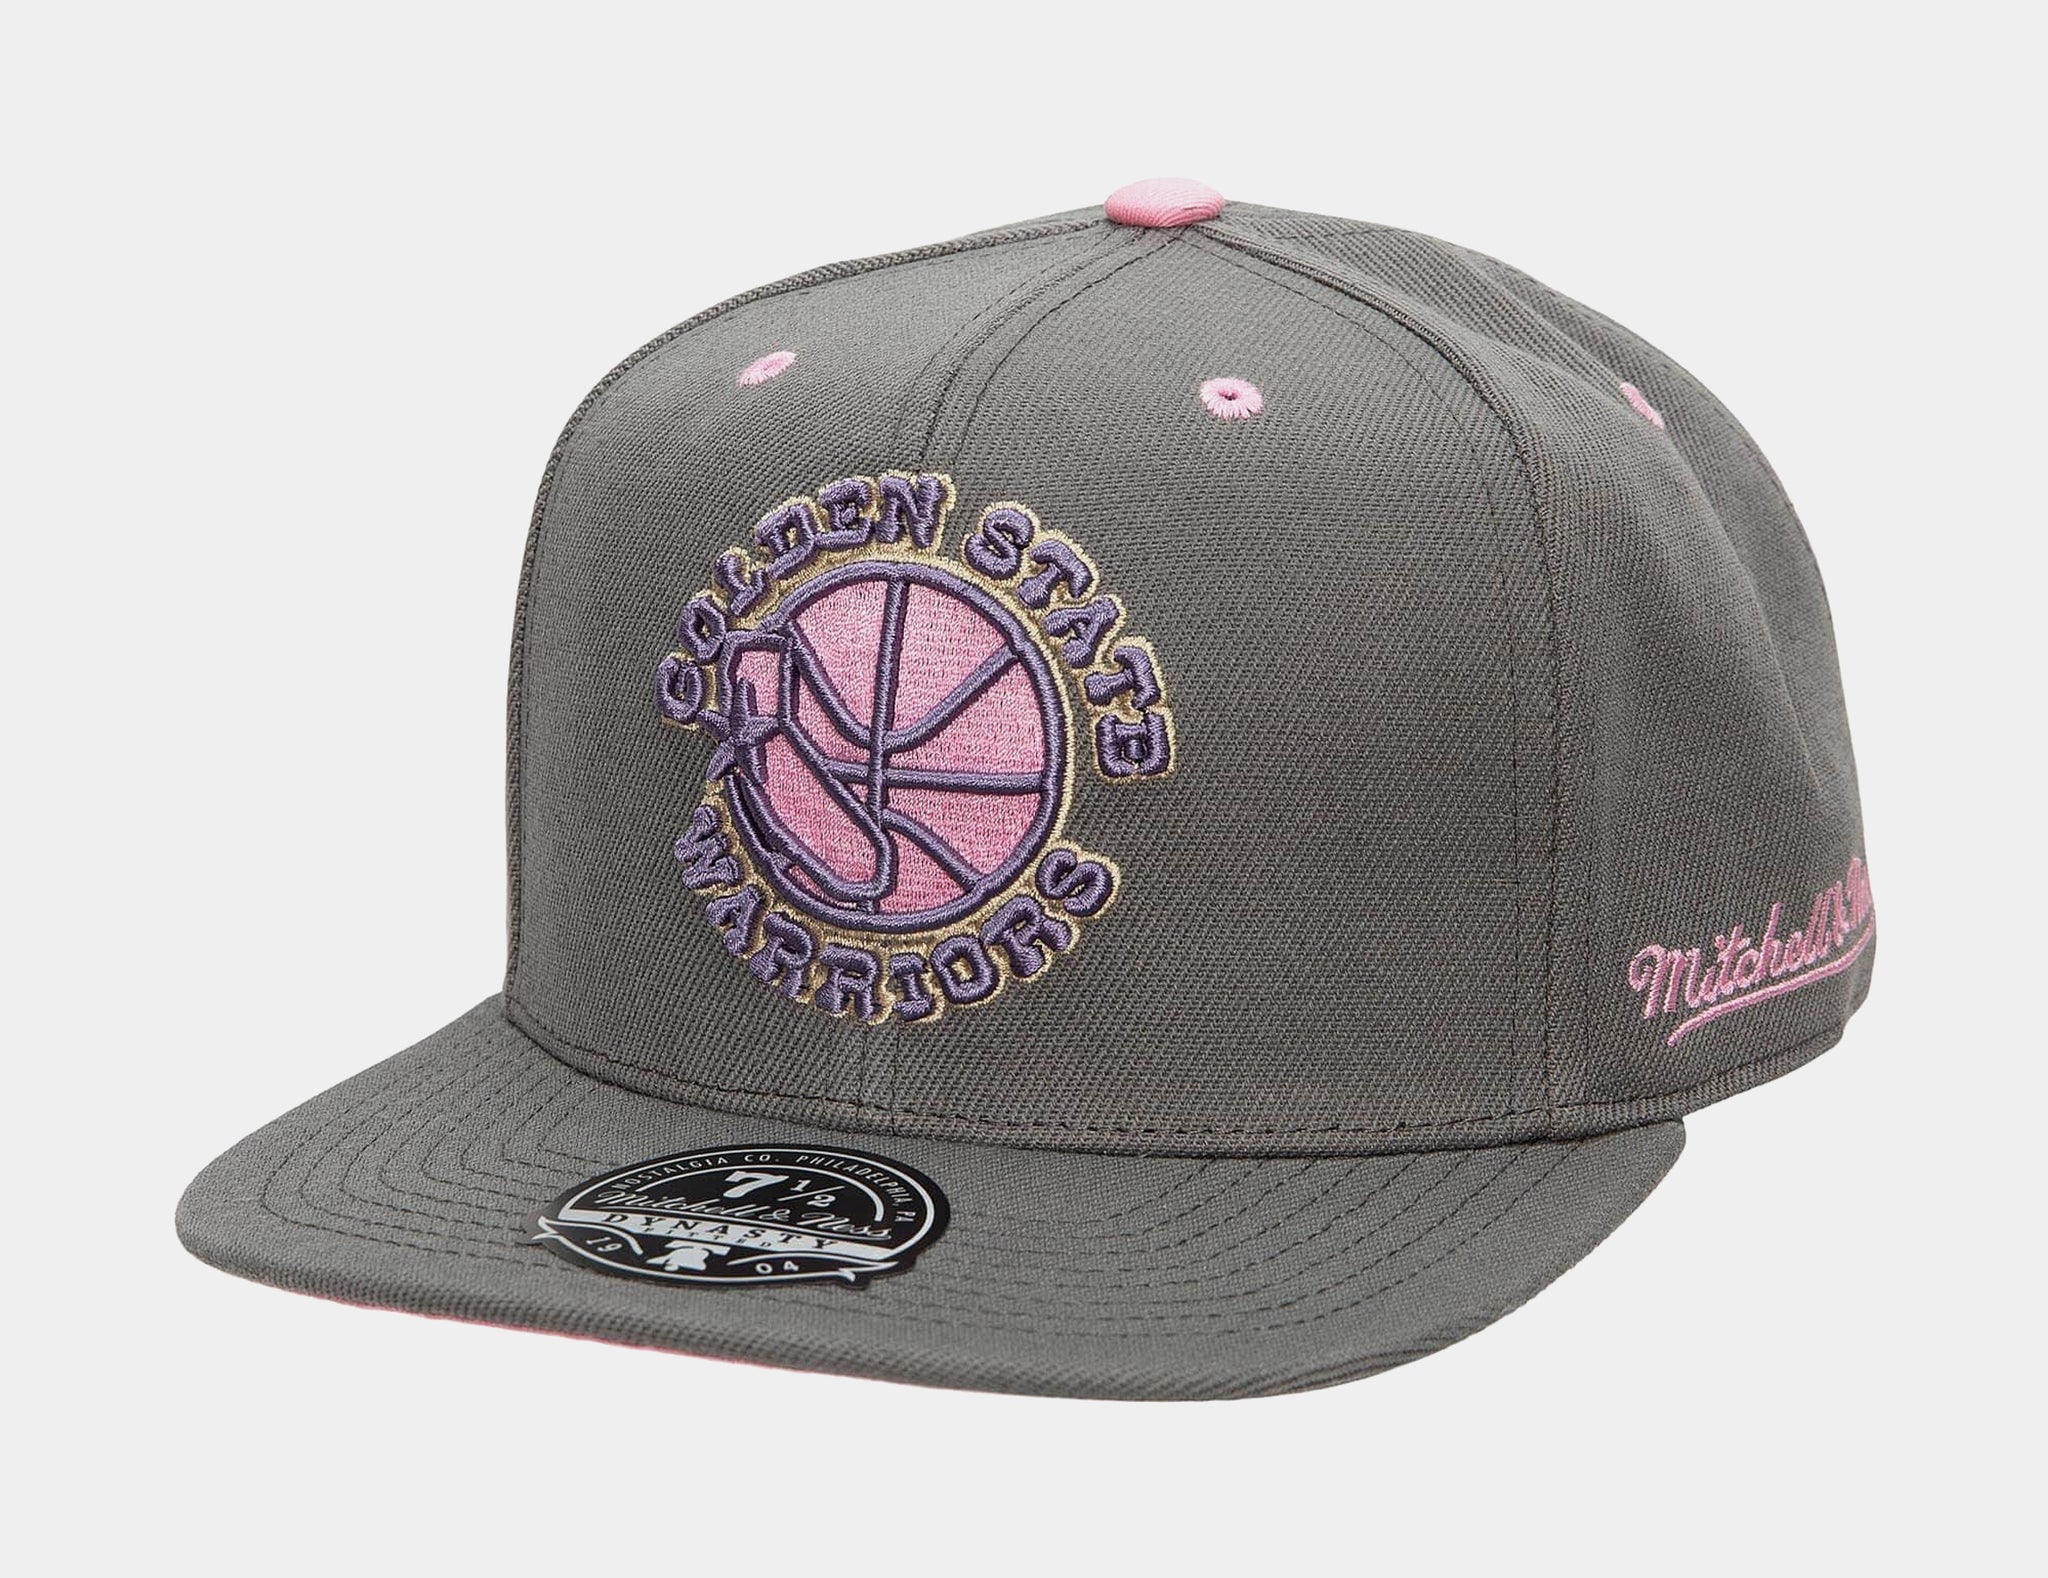 MITCHELL AND NESS Team Script 2.0 Fitted Hat Golden State Warriors